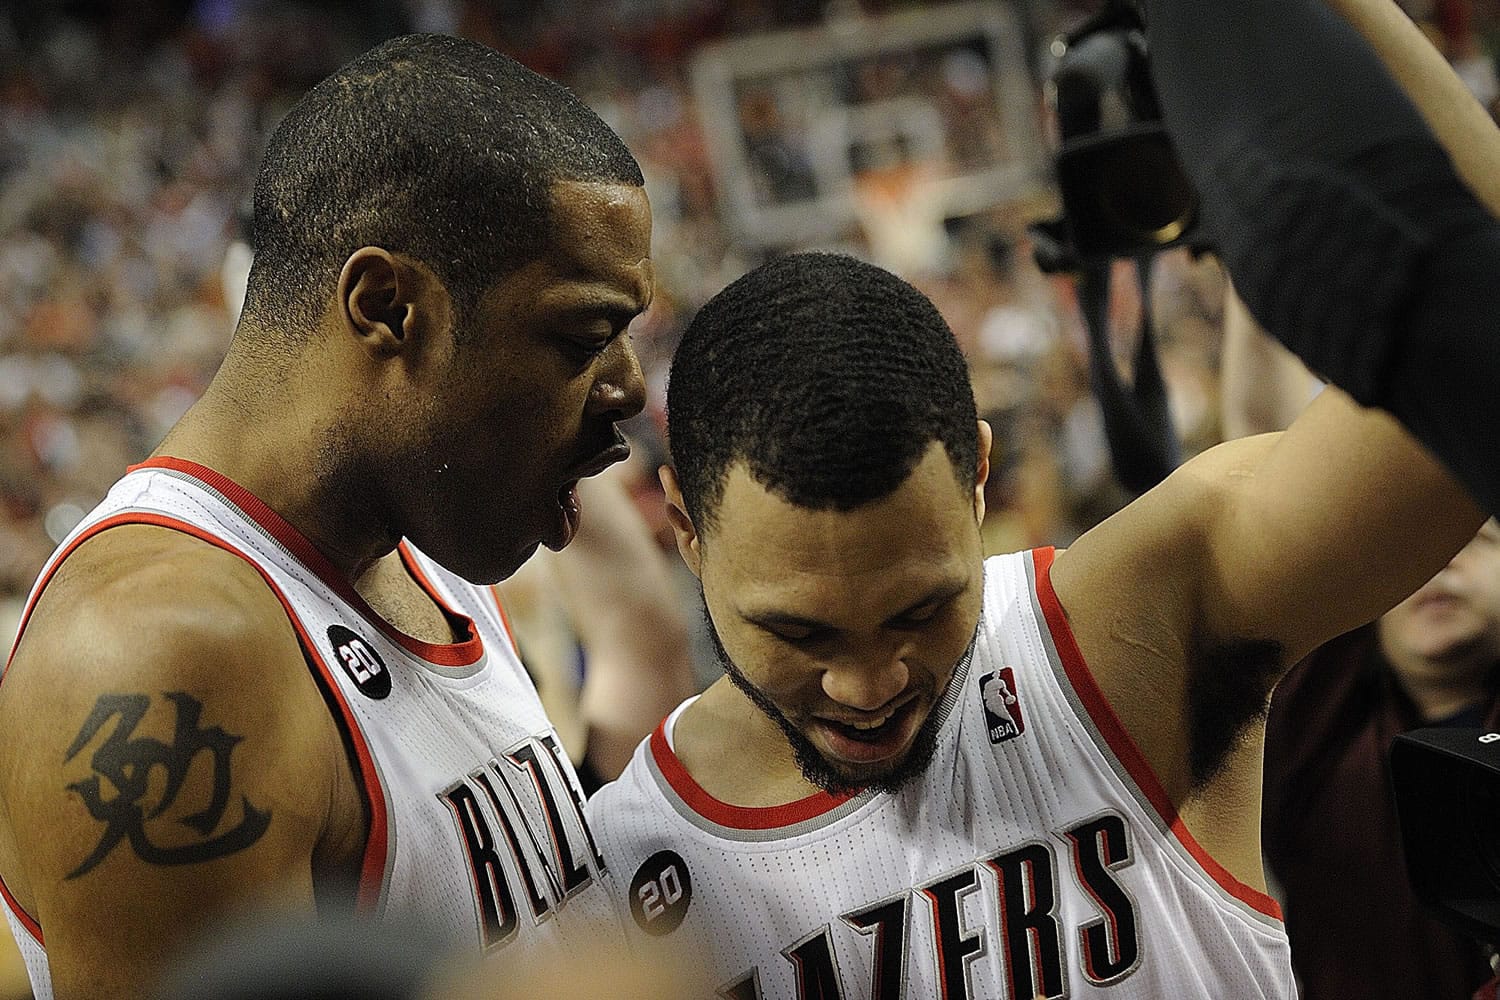 With all signs pointing to the NBA lockout ending, the Blazers will have some decisions to make about Brandon Roy, right, and Marcus Camby, among other personnel.